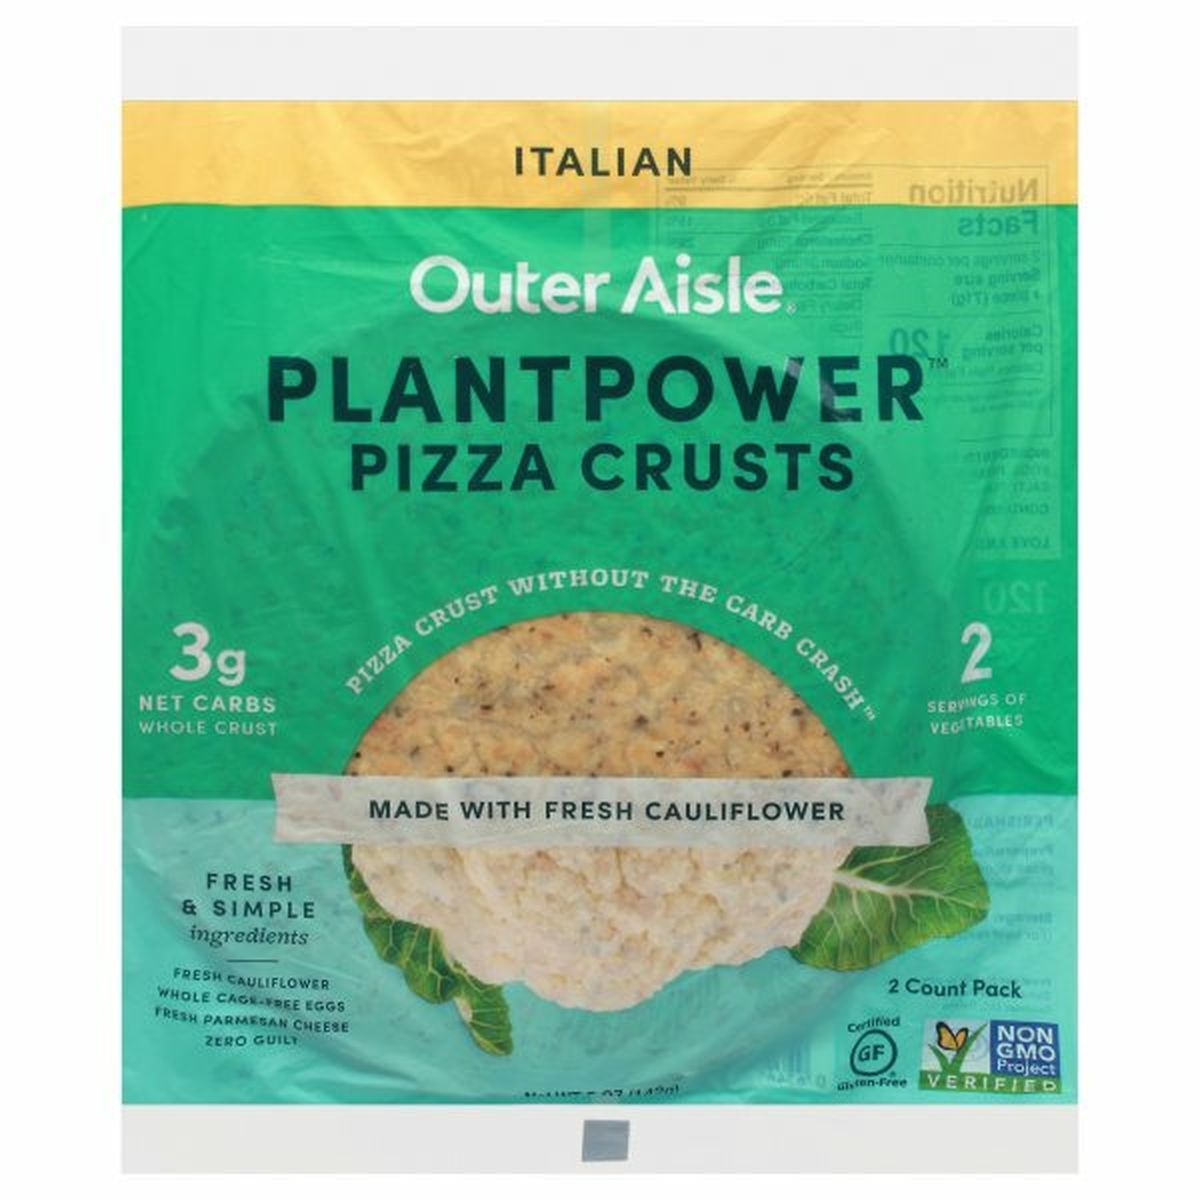 Calories in Outer Aisle PlantPower Pizza Crusts, Italian